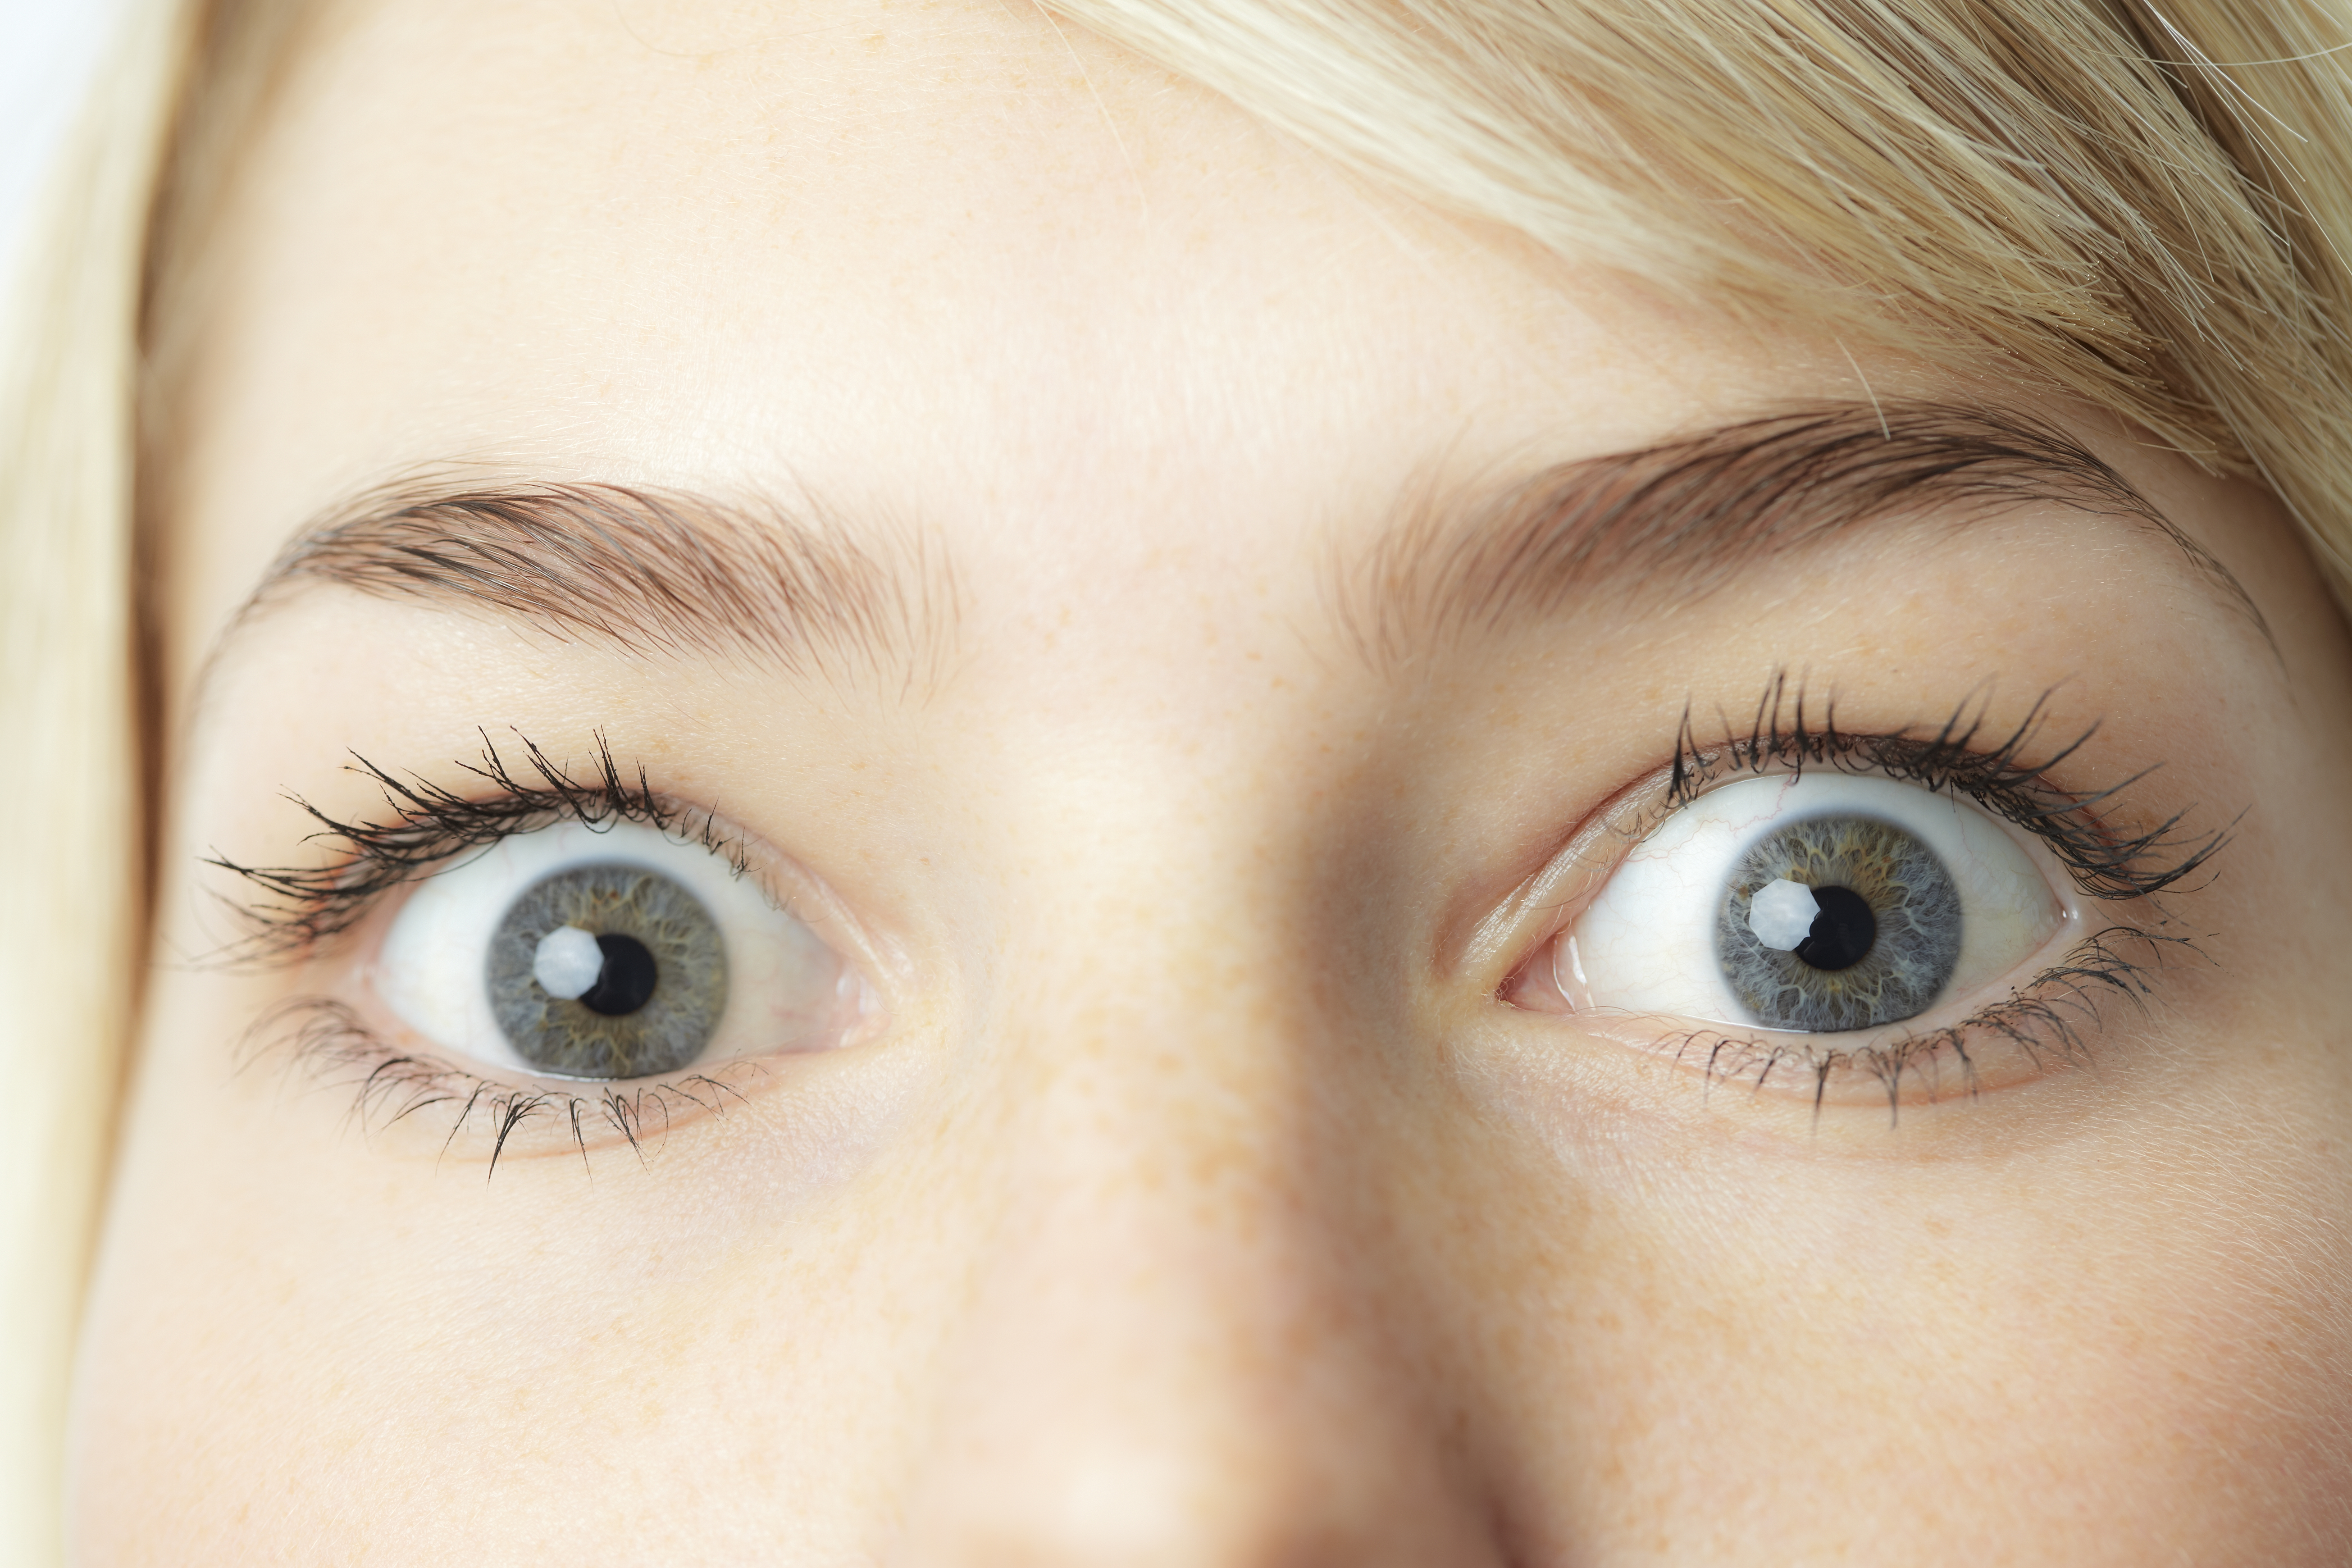 Eyes of young woman, close-up | Source: Getty Images